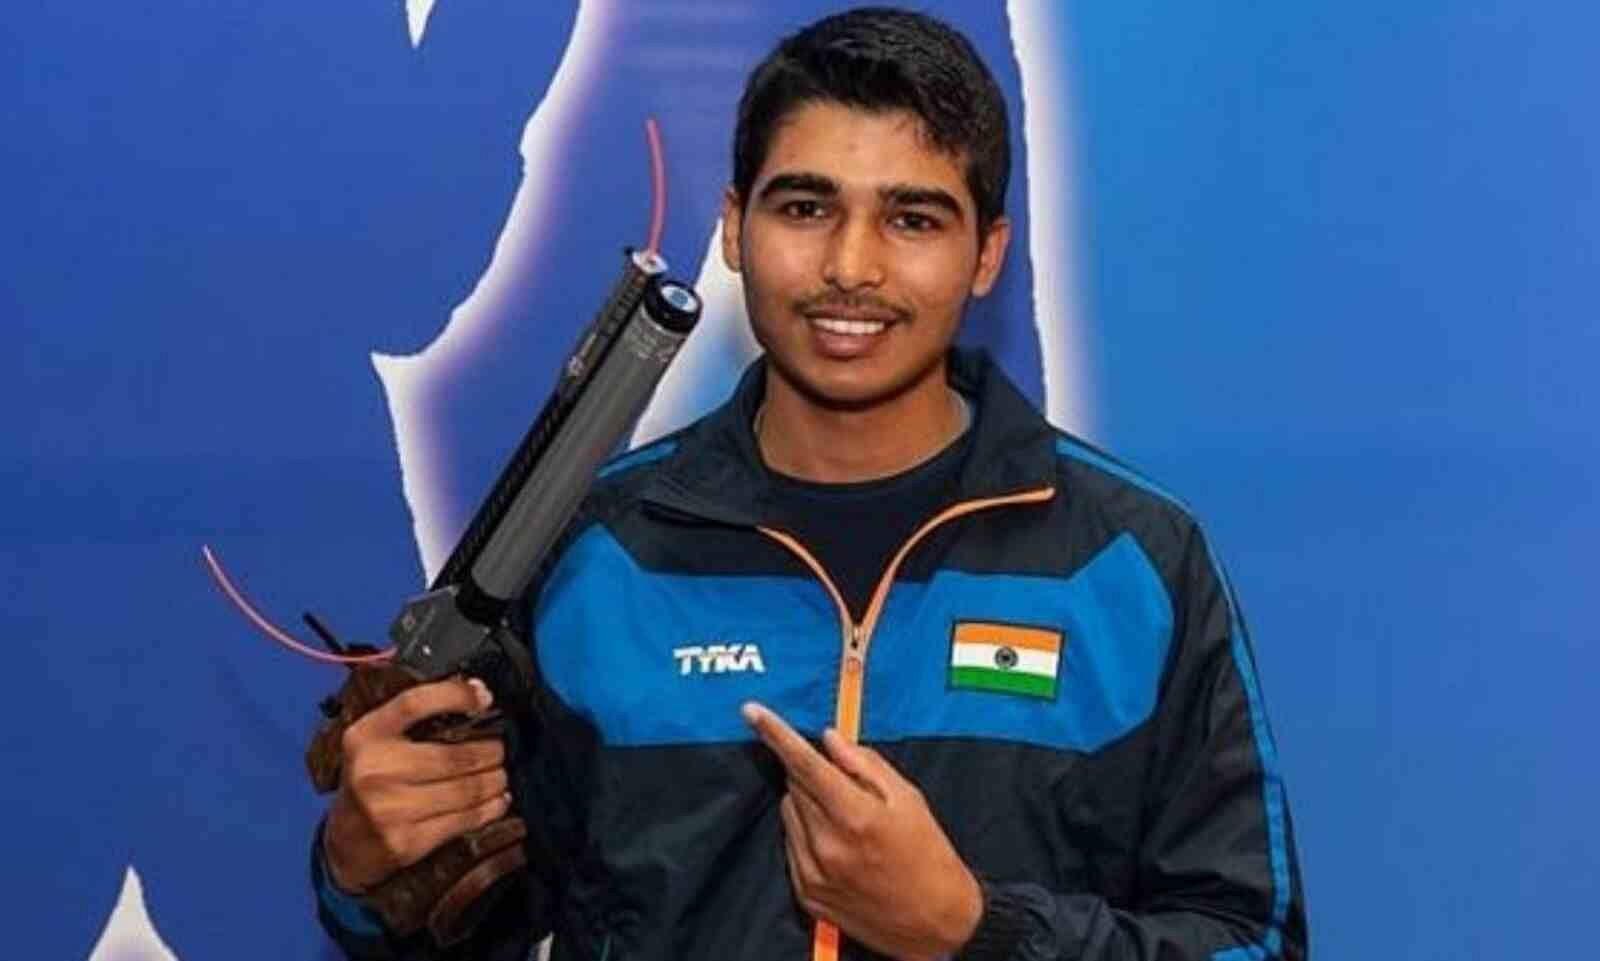 Saurabh Chaudhary finishes 30th in first international tournament back from hiatus